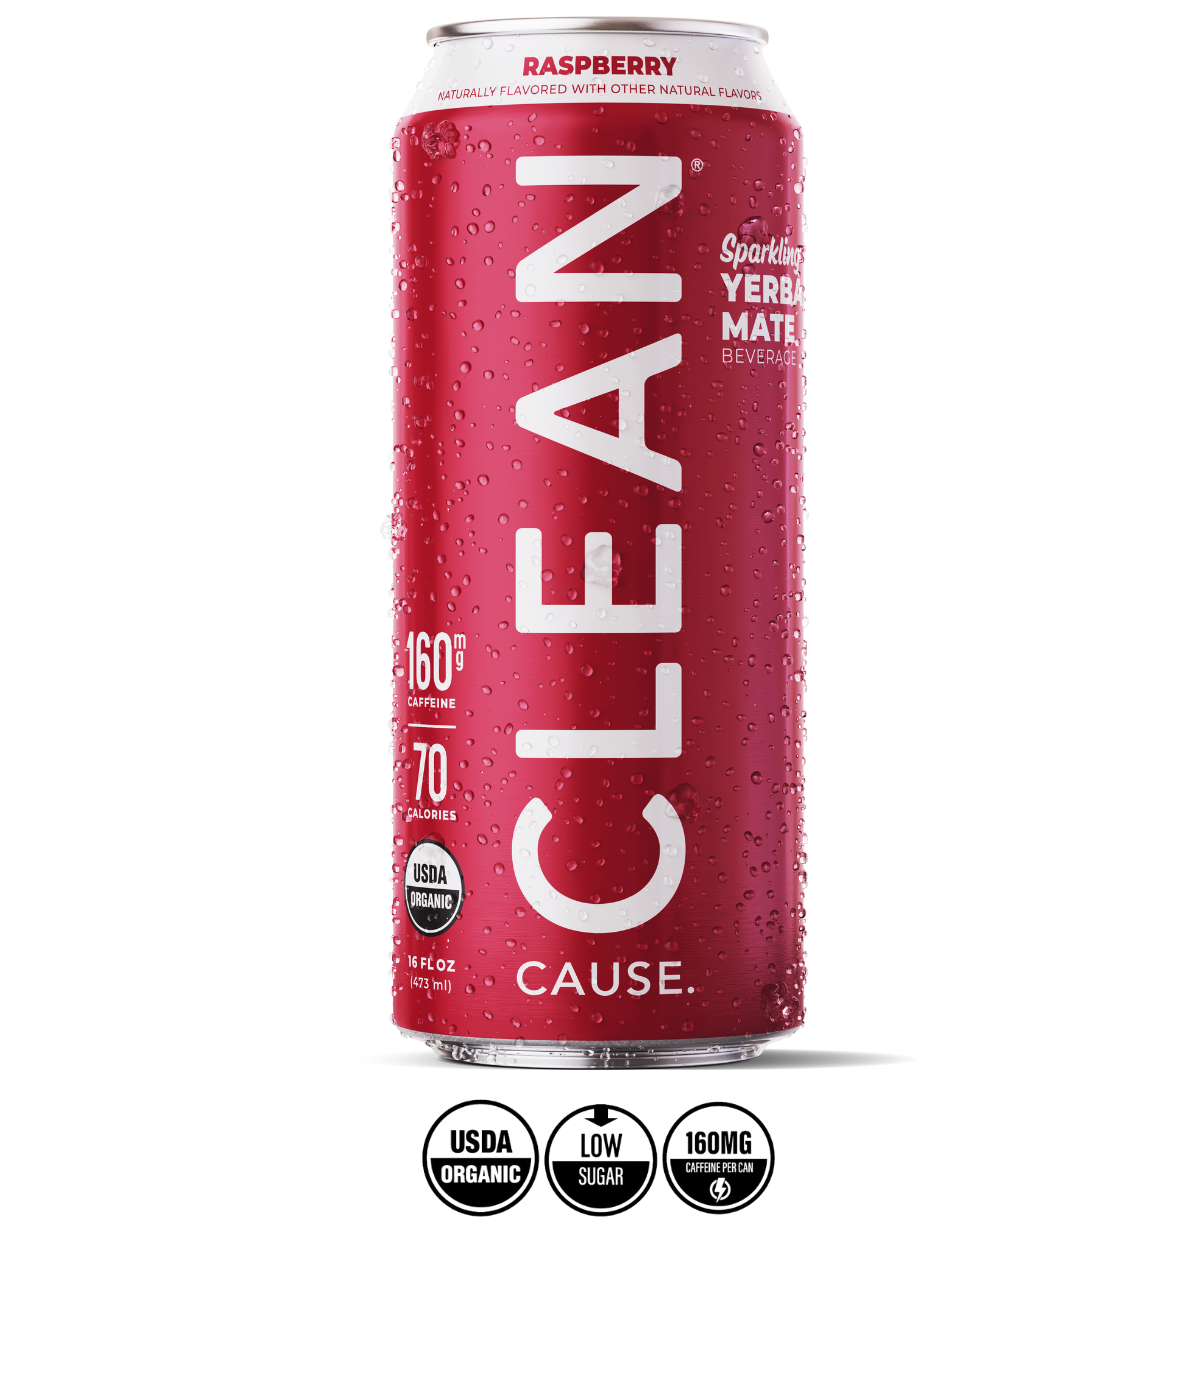 A can of CLEAN Cause Raspberry with the labels USDA Organic, 160mg of caffeine, and low sugar